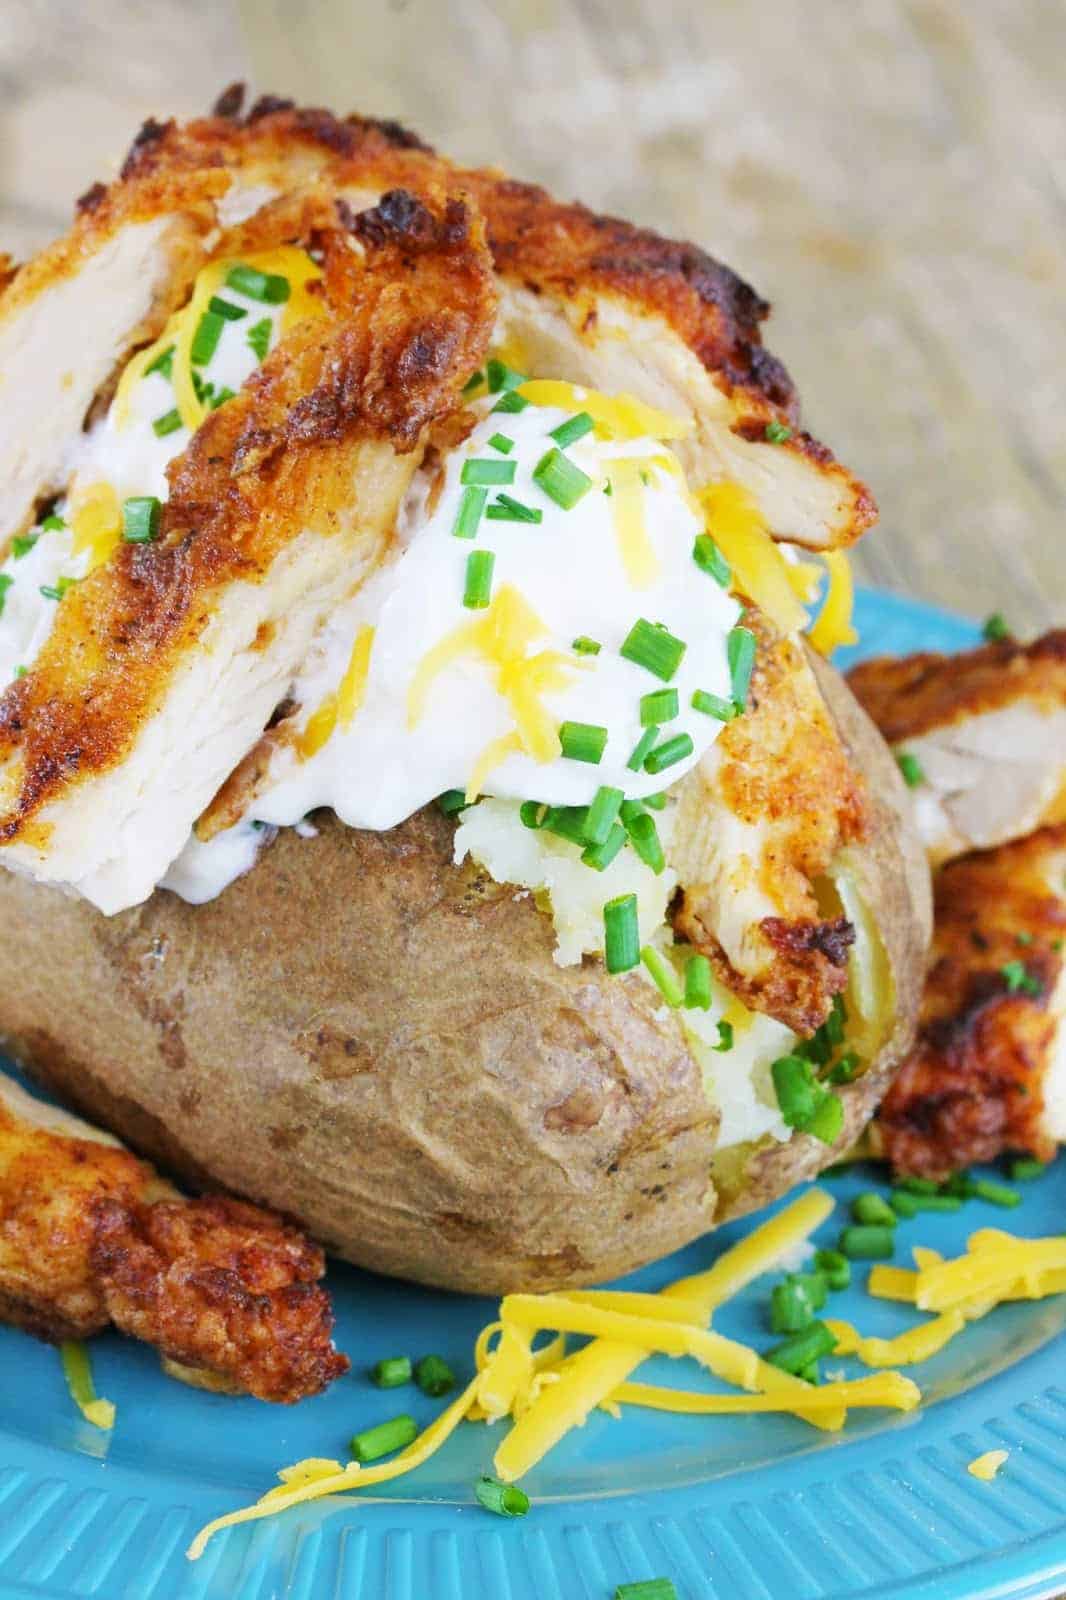 A baked potato stuffed with sour cream, cheddar cheese and fried chicken, garnished with fresh chives